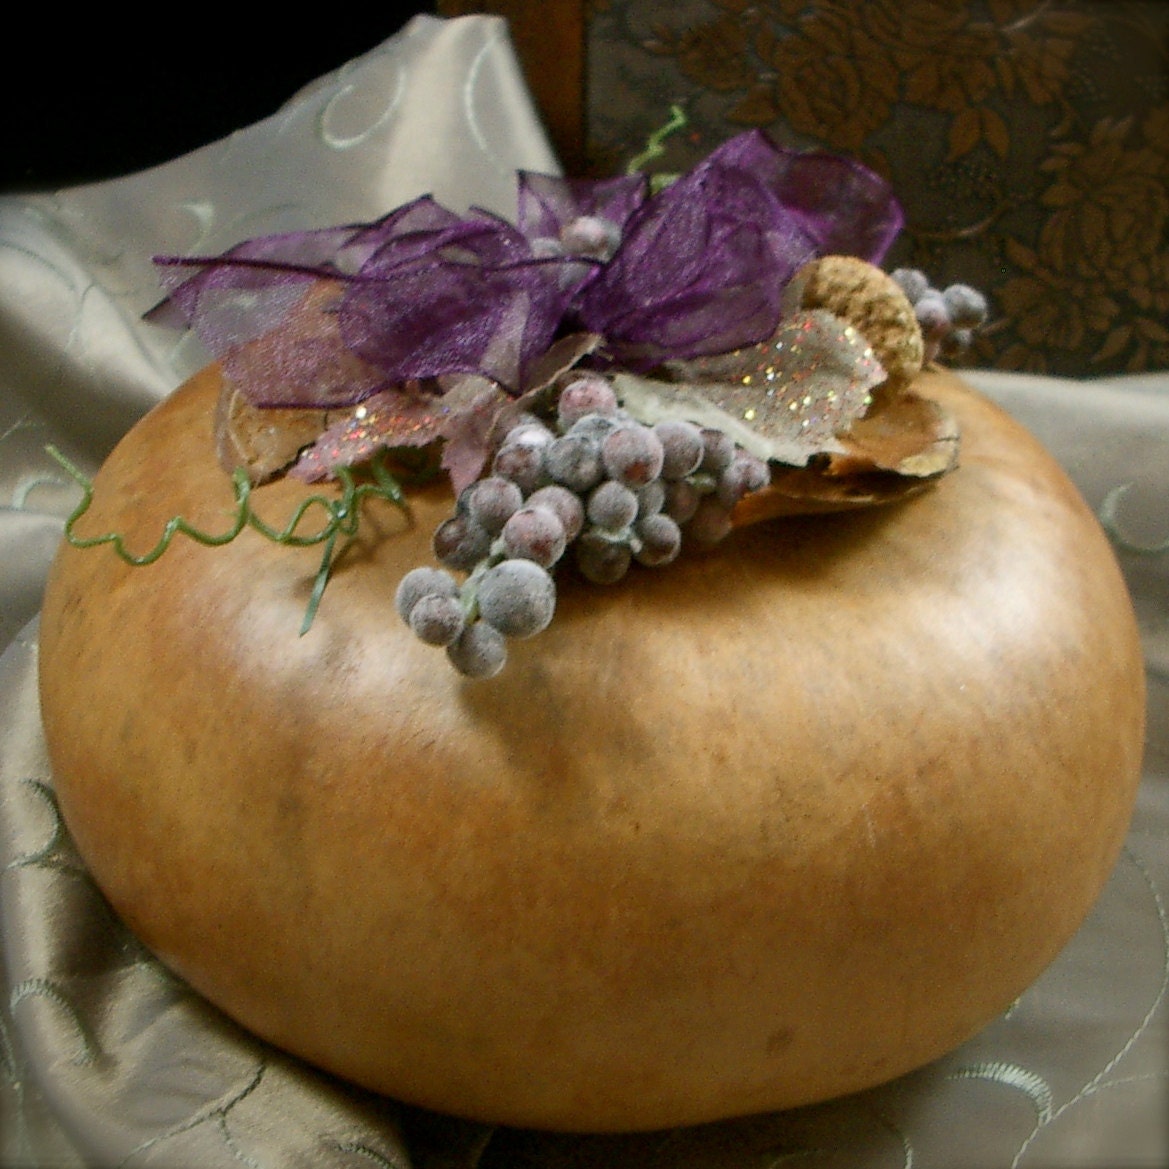 Decorative Natural Gourd for your Table with grape clusters - mymandycrafts